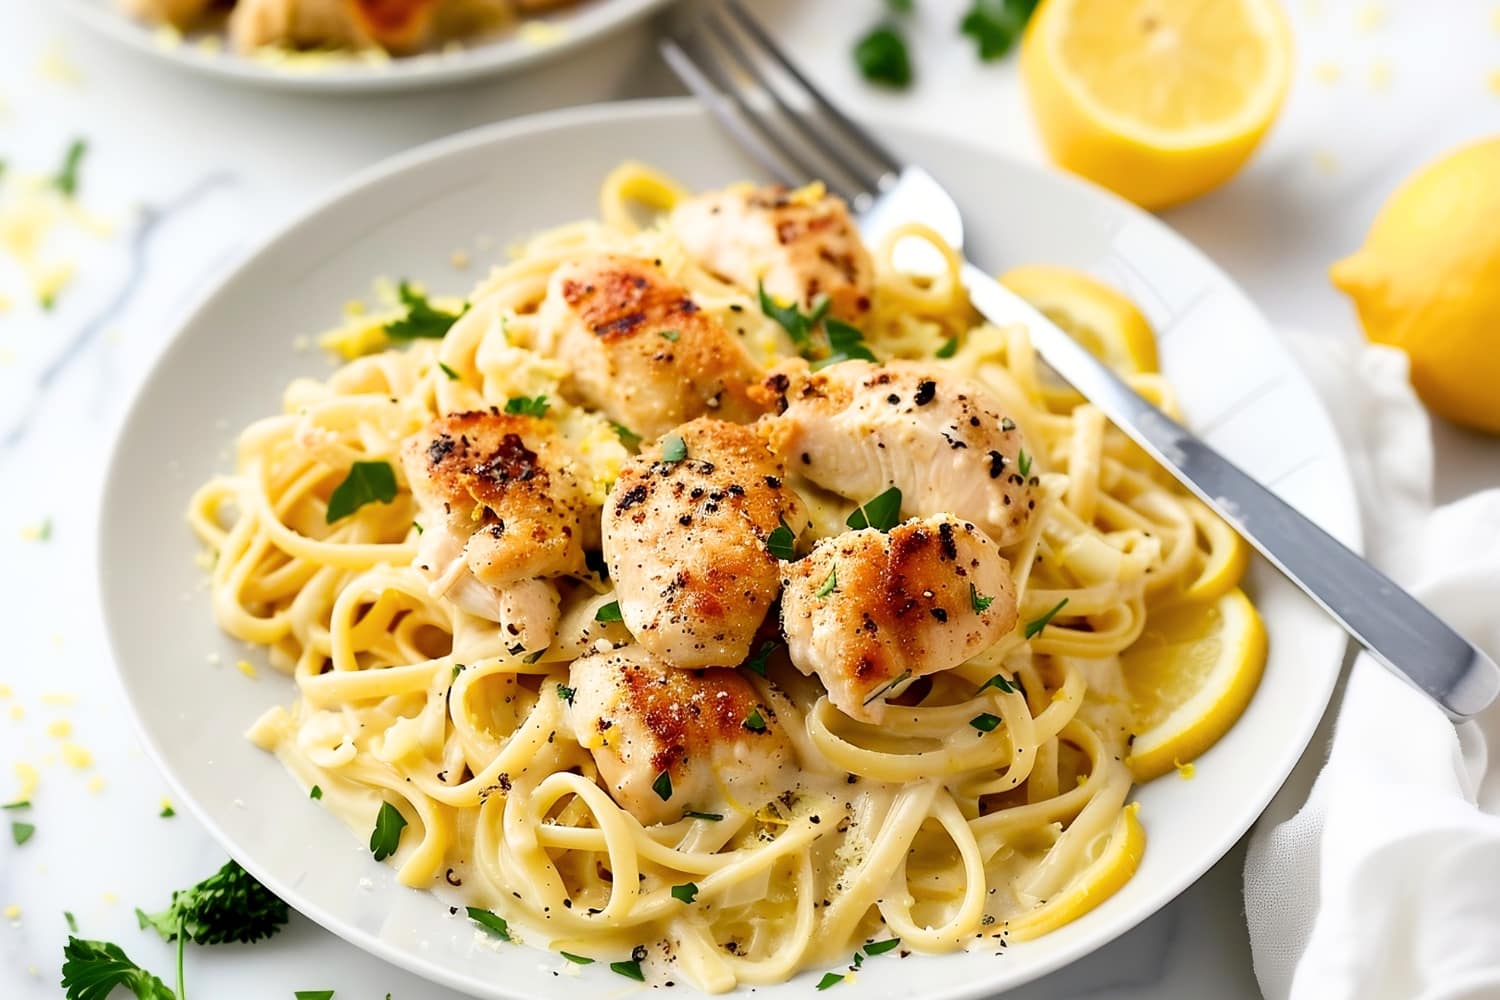 A plate of lemon chicken pasta, garnished with parsley